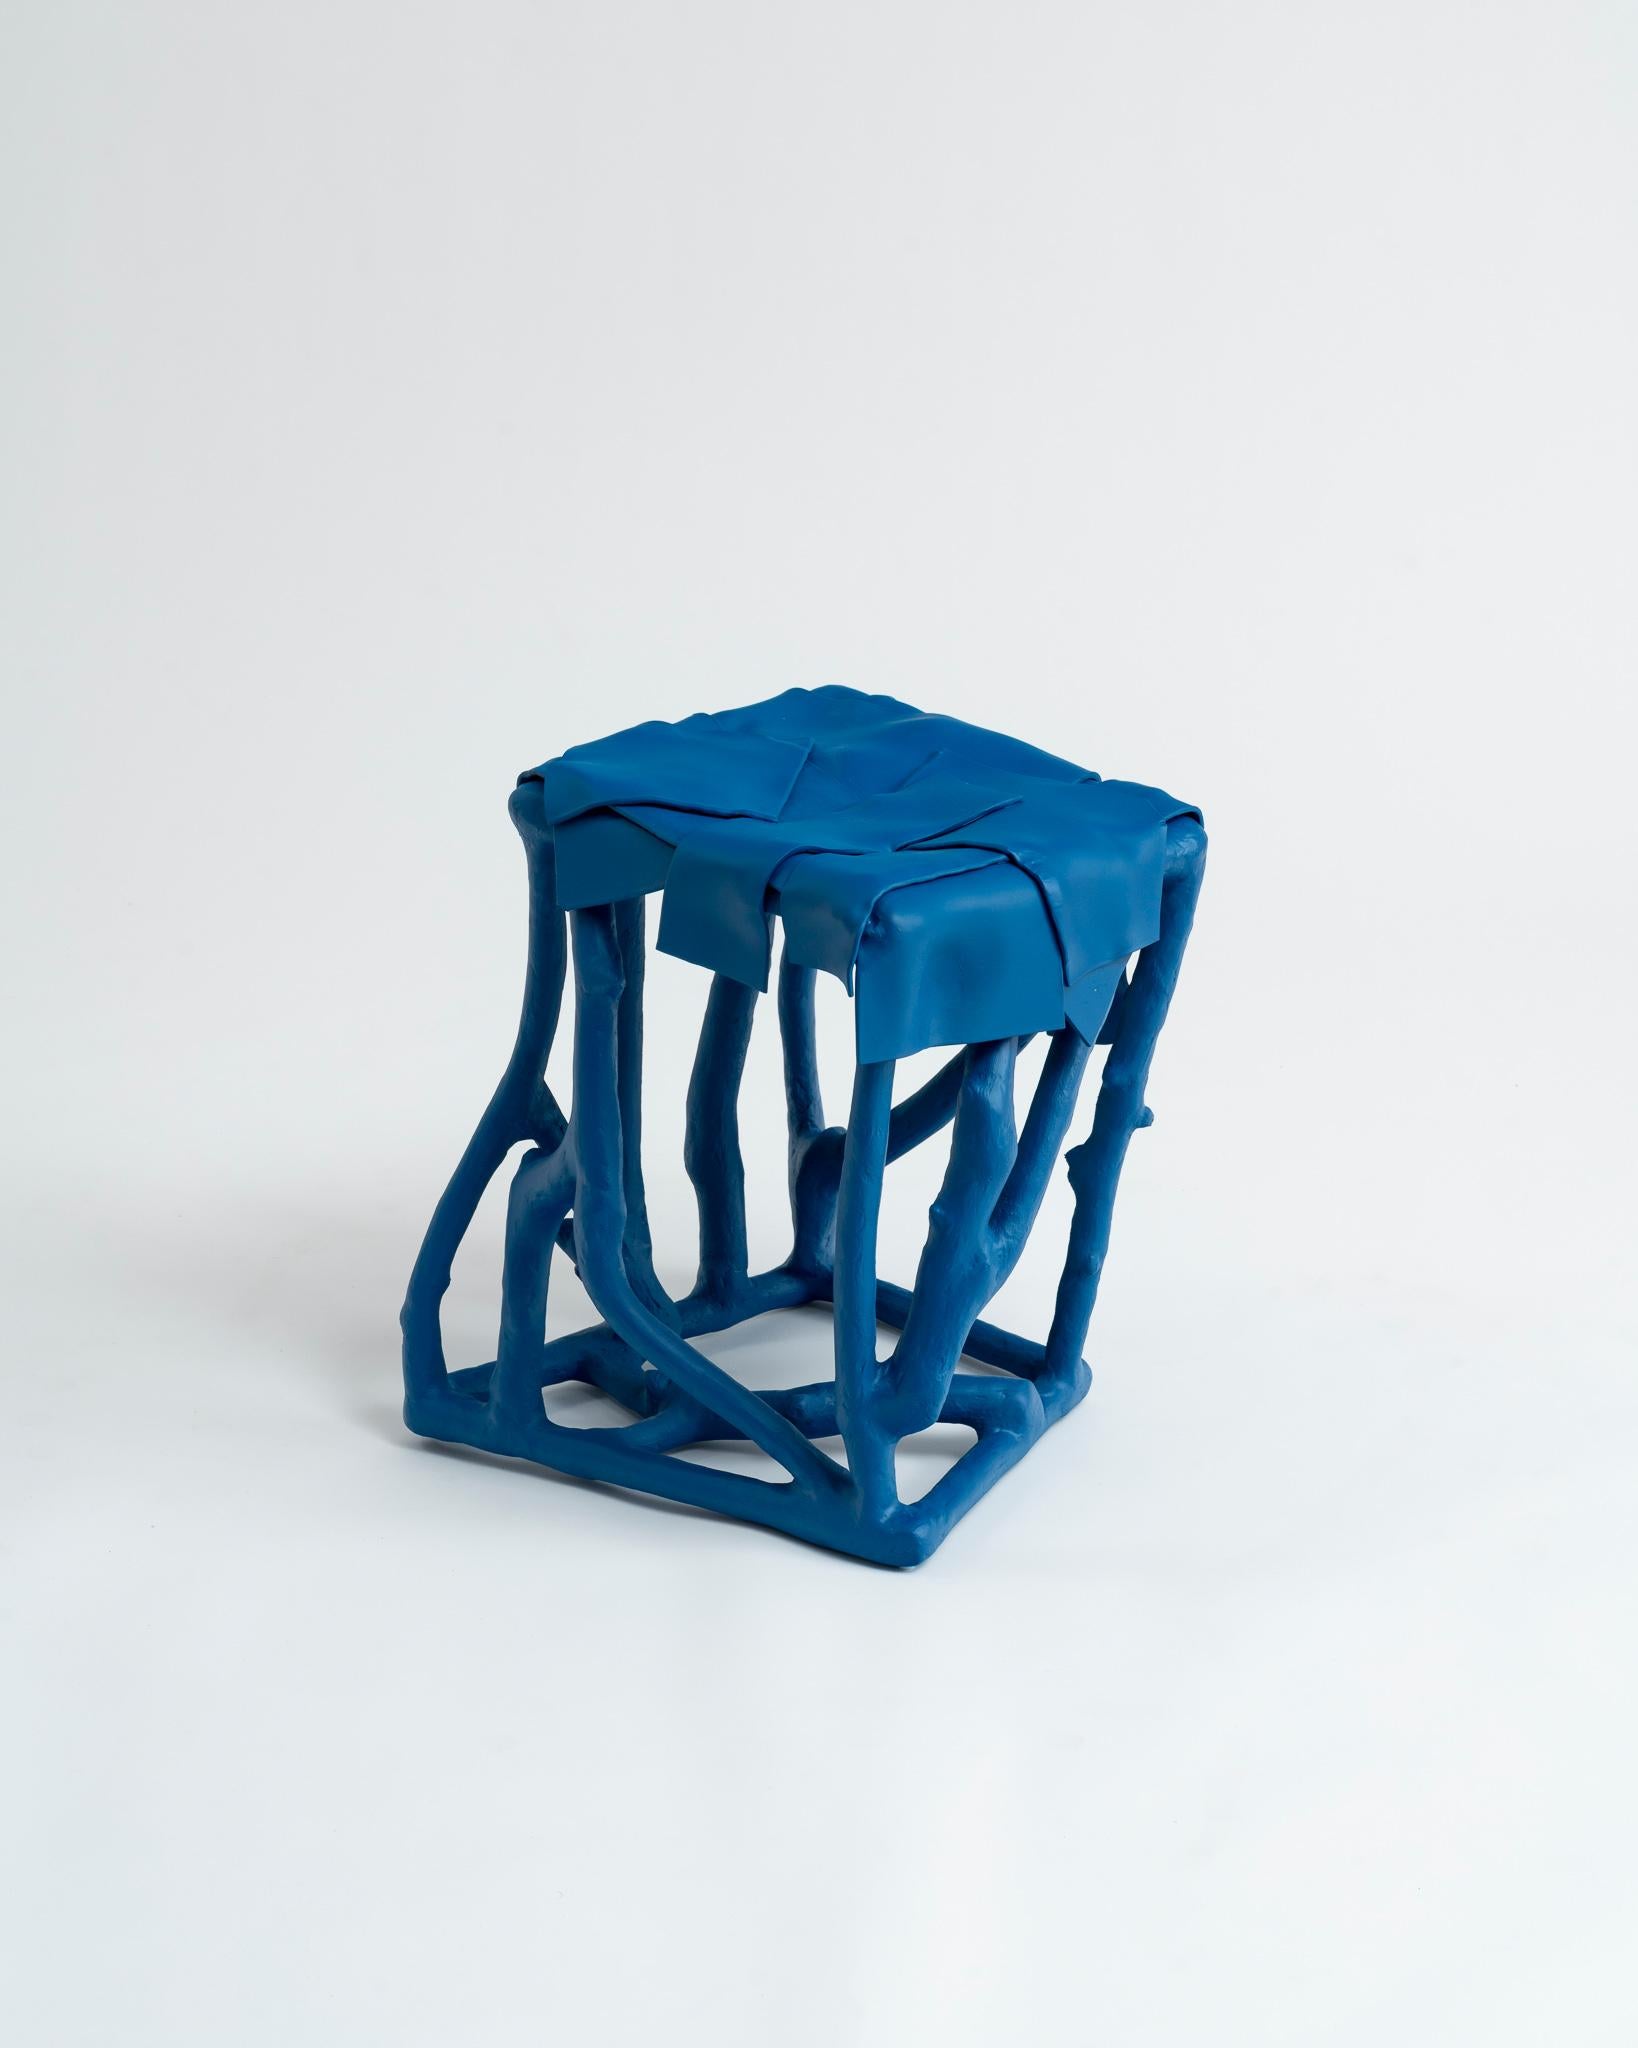 Organic Modern Eclectic, One-Off Decorative Accent Table or Stool in Vivid Azure Blue For Sale